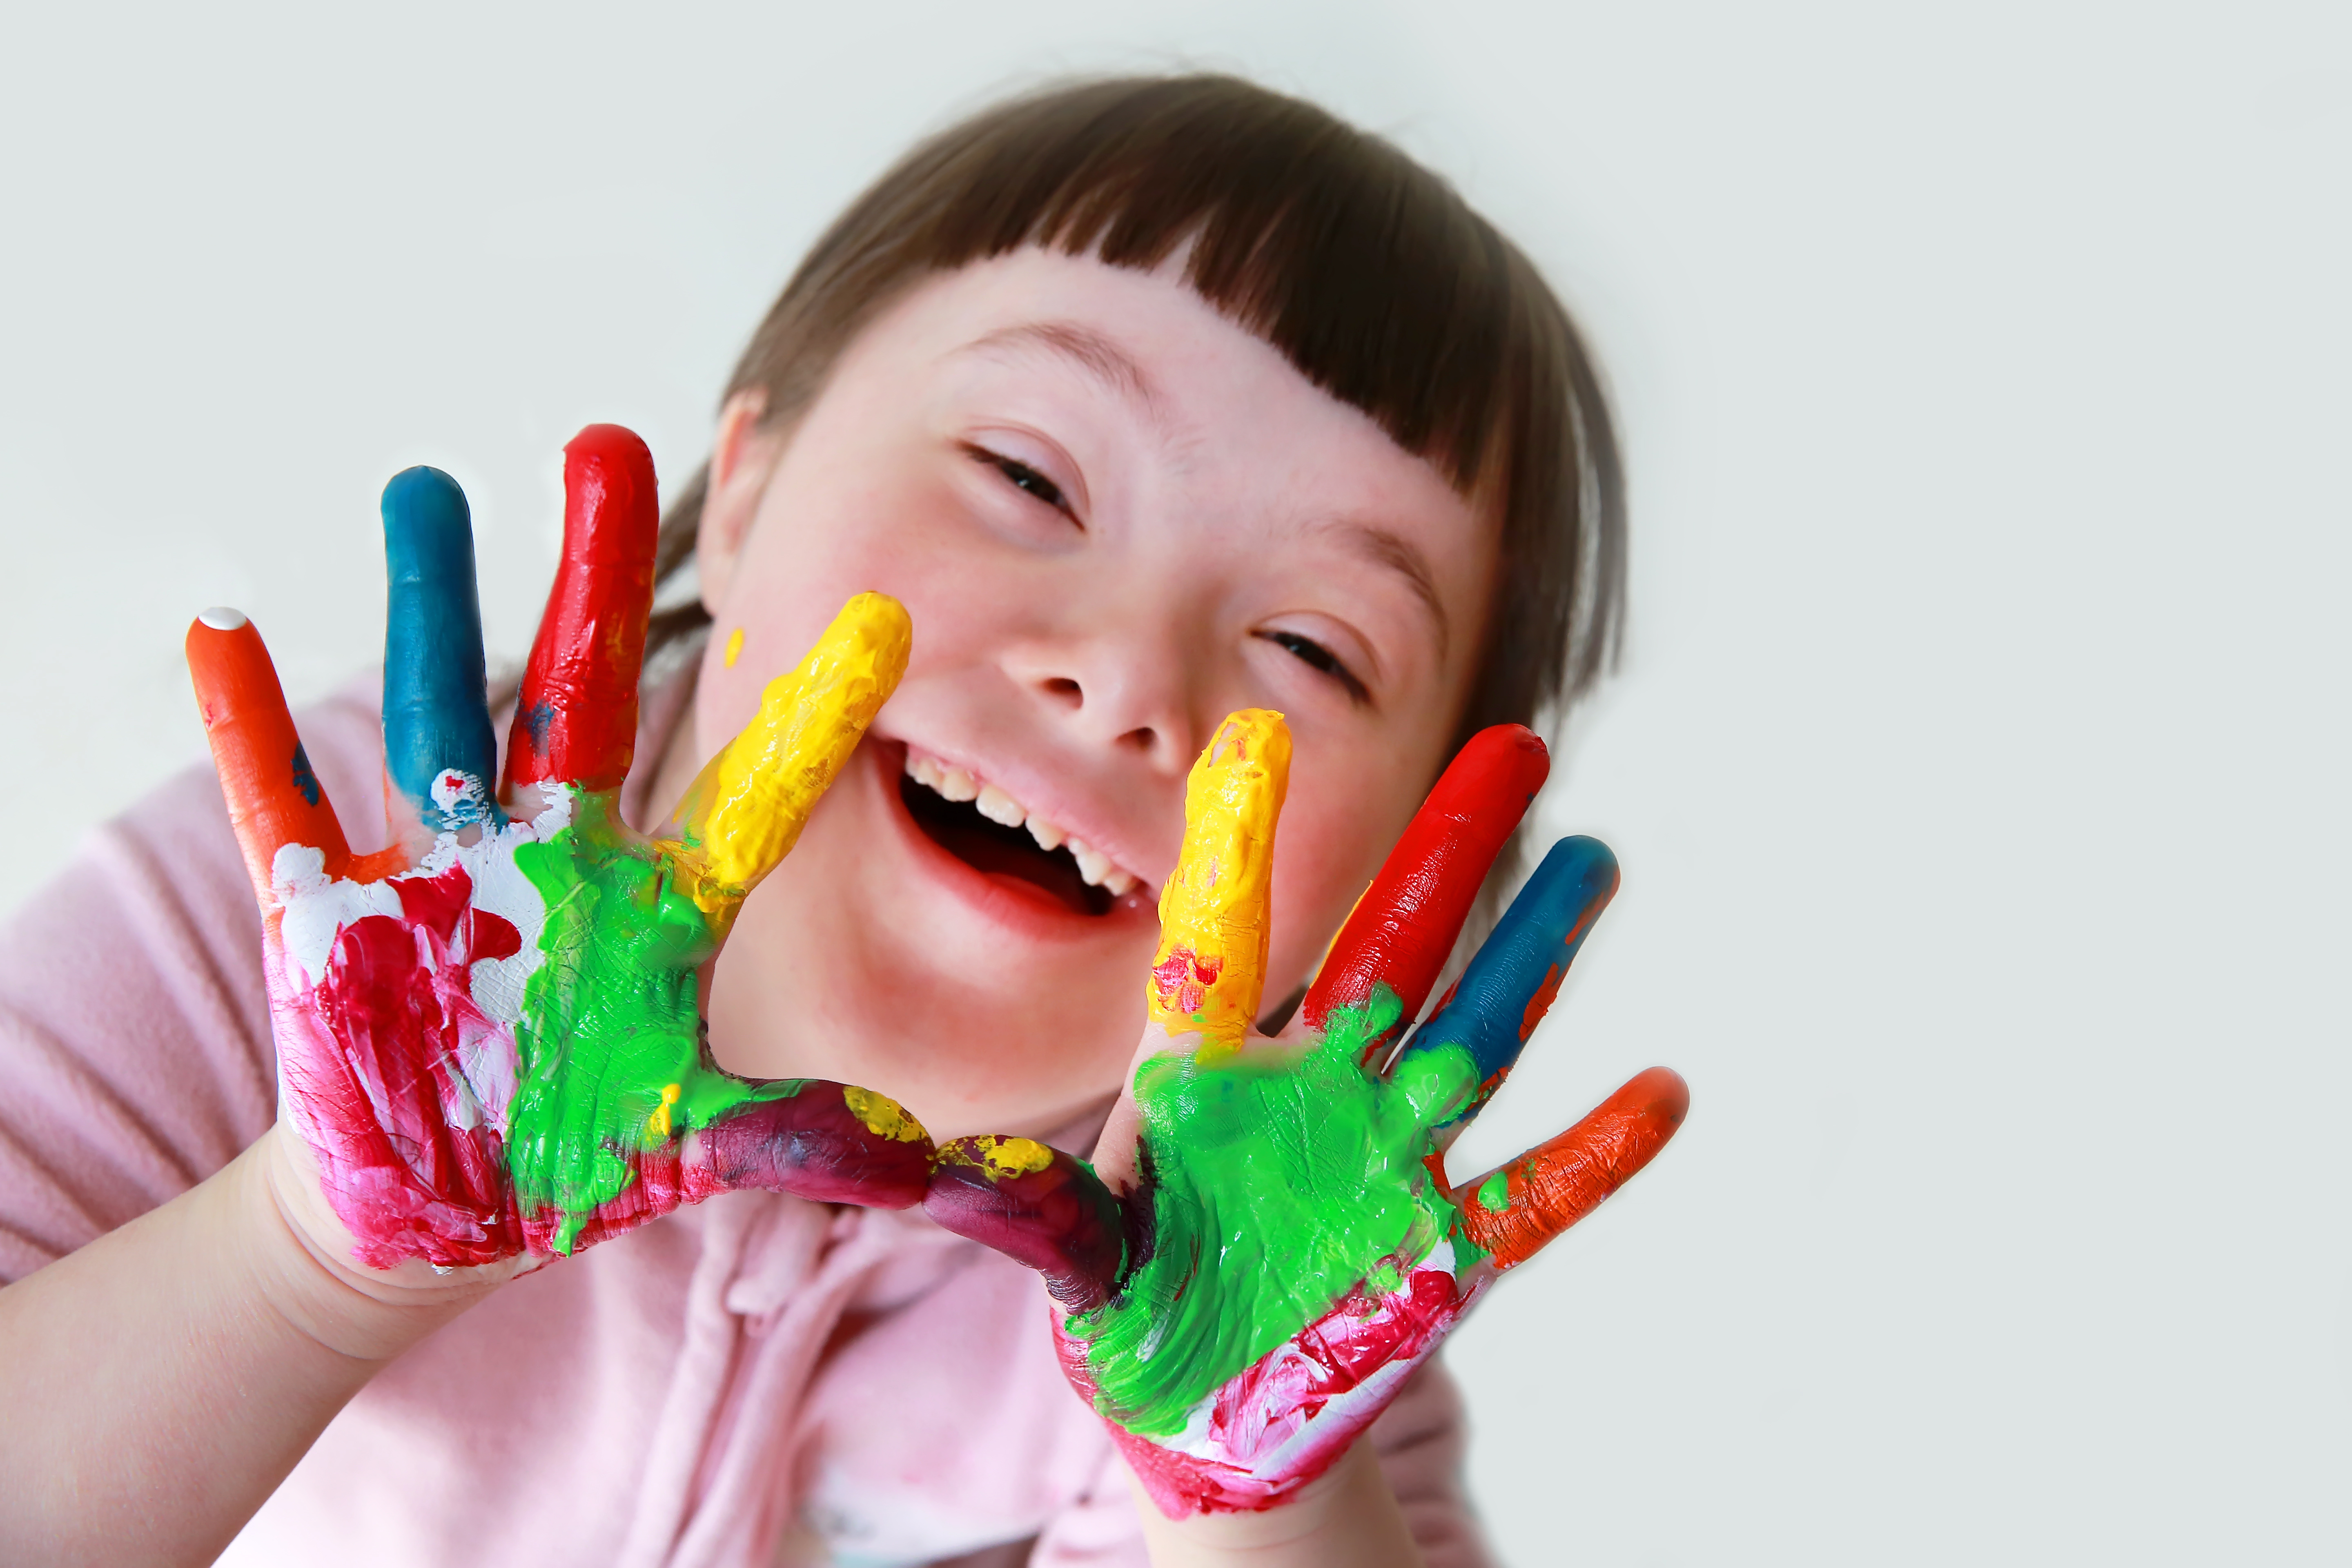 Student with disabilities smiling with finger paints